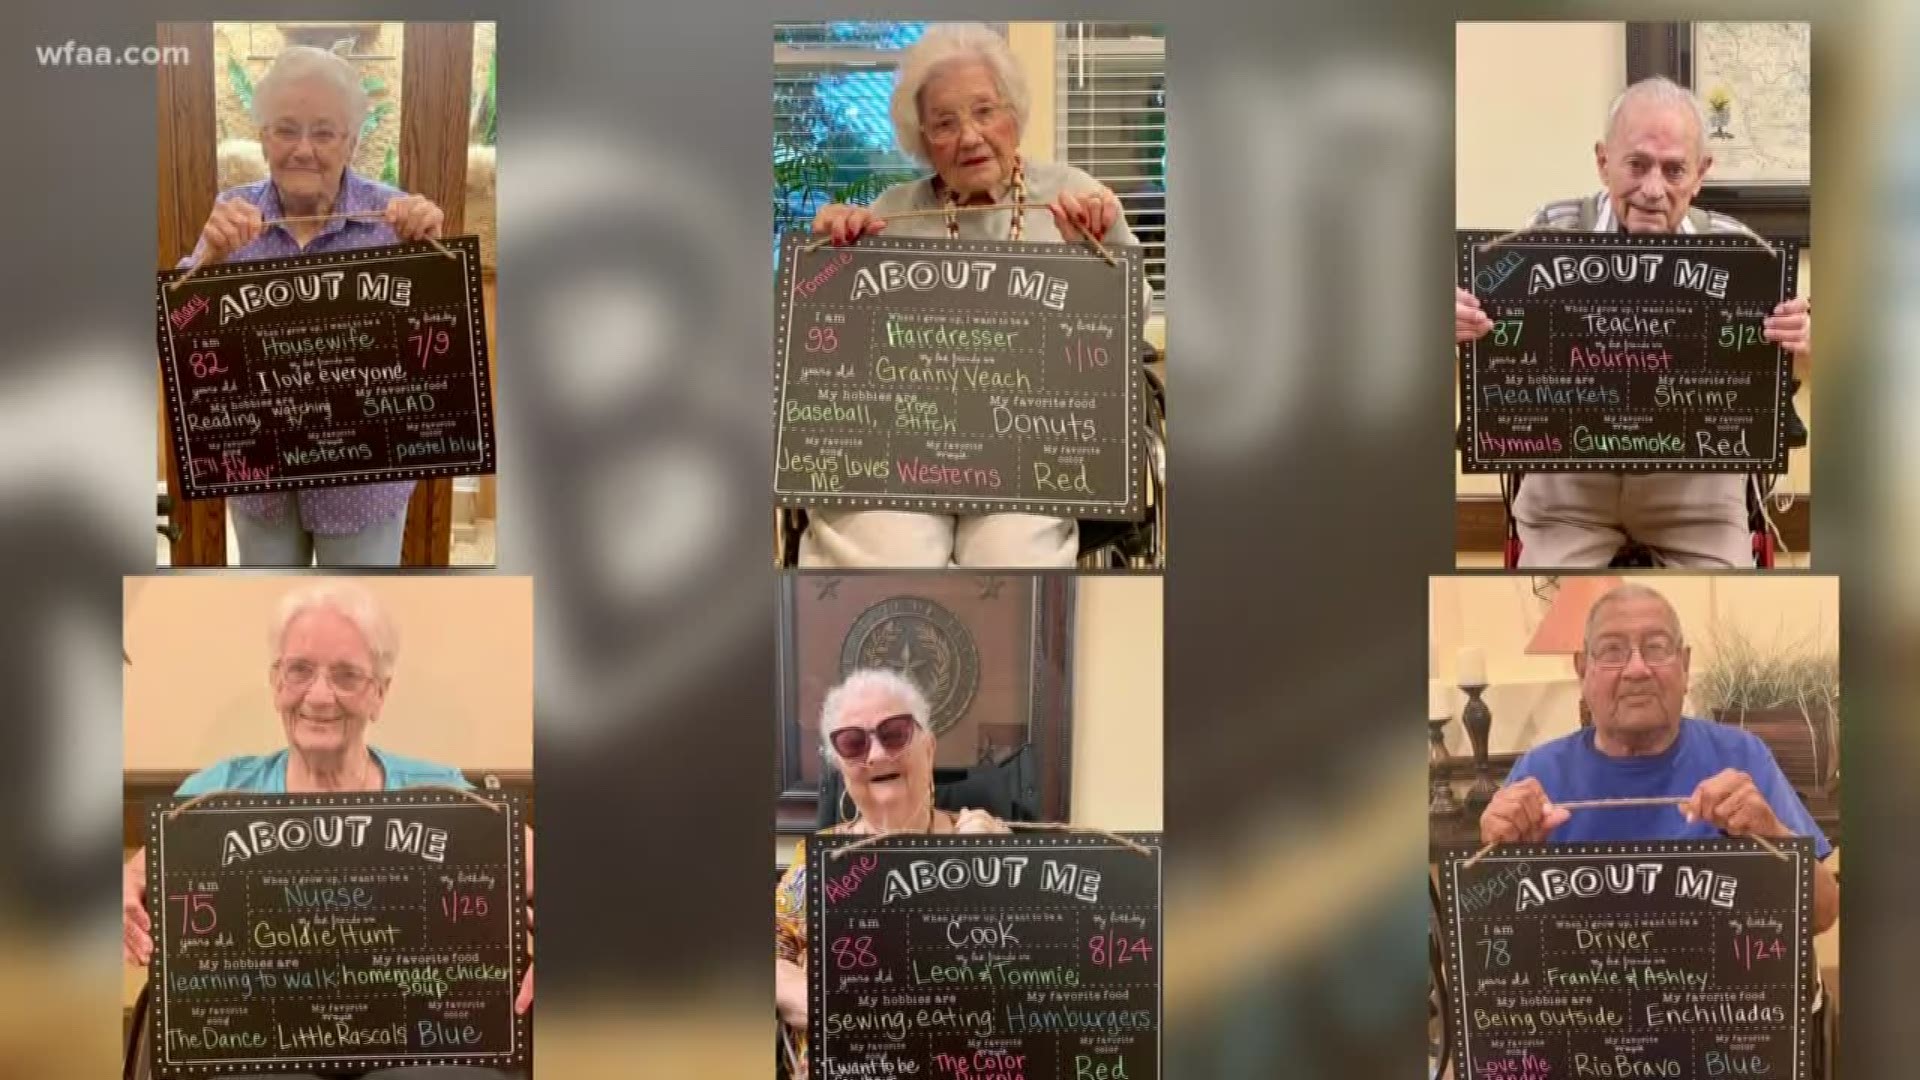 Mineral Wells Nursing and Rehab decided to take back to school pictures for their seniors, complete with that adorable chalk board so many of you use. "We have fun here, too," said the center's marketing guru, Mandy Koenig. The photos quickly went viral.